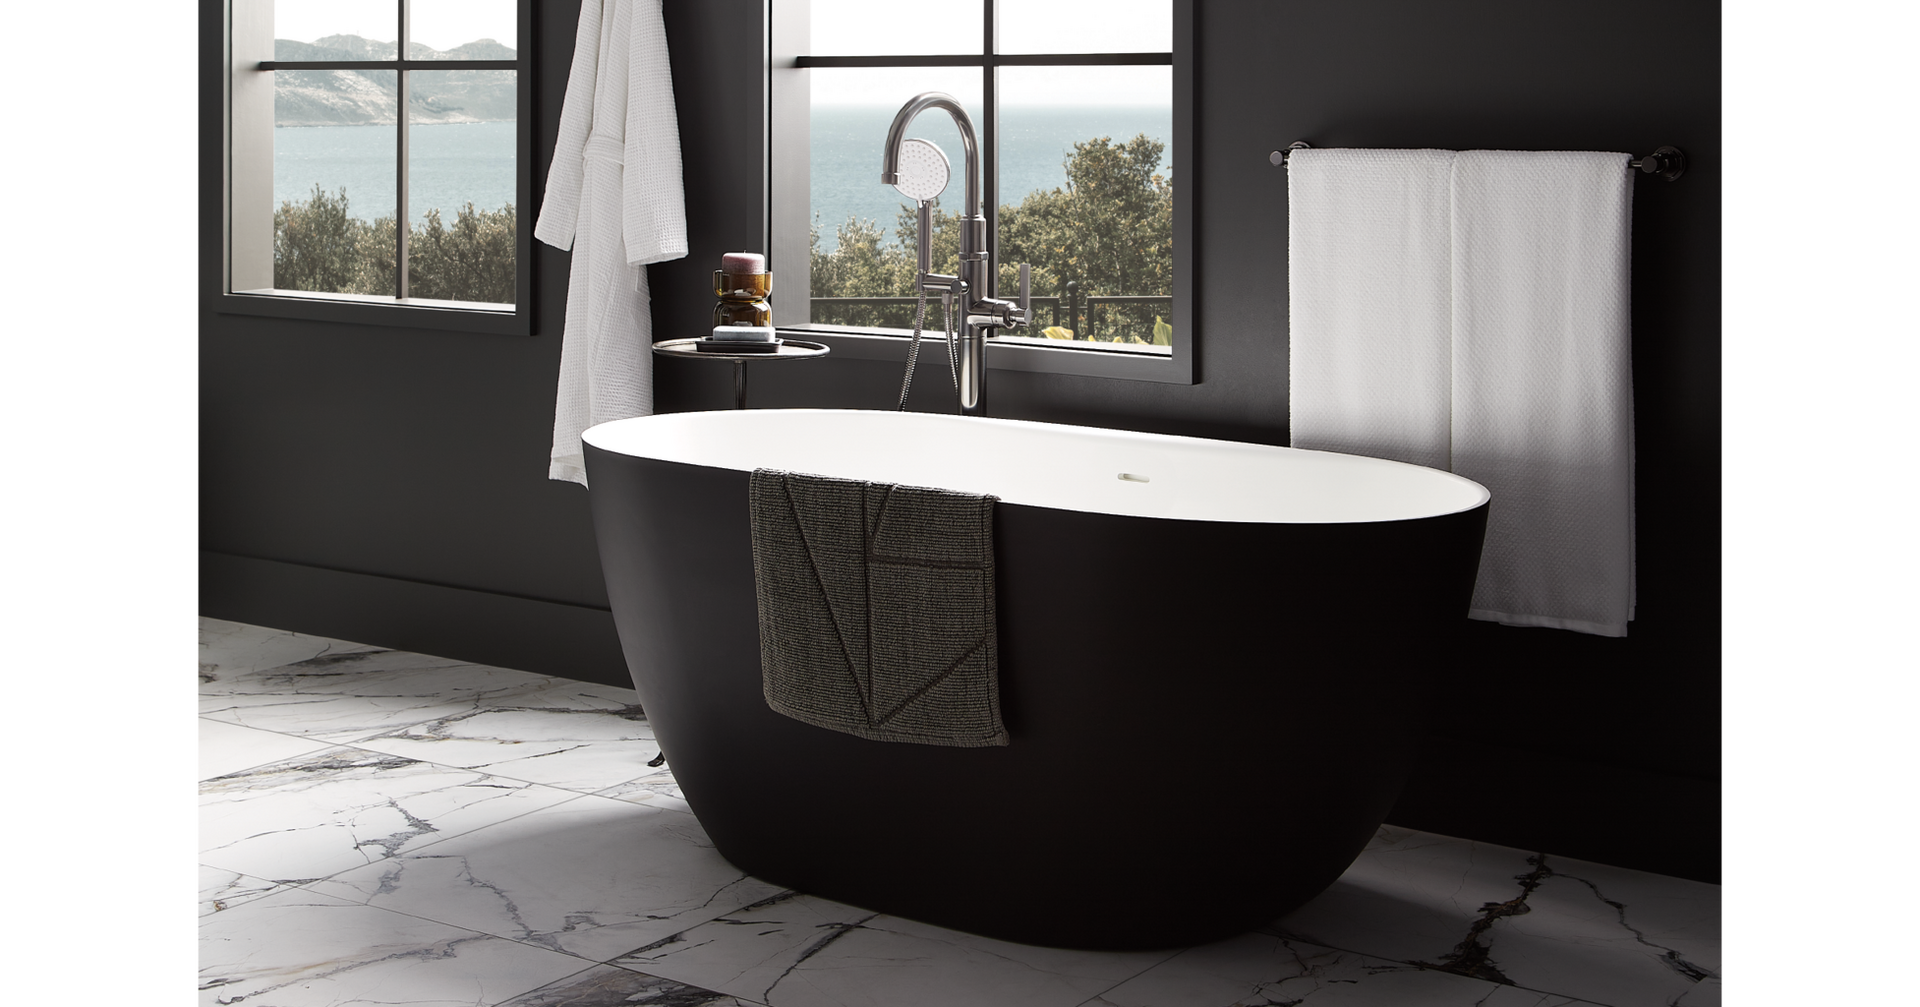 59" Catino Solid Surface Freestanding Tub in Matte Black & Greyfield Freestanding Tub Faucet in Gunmetal for bathtub essentials